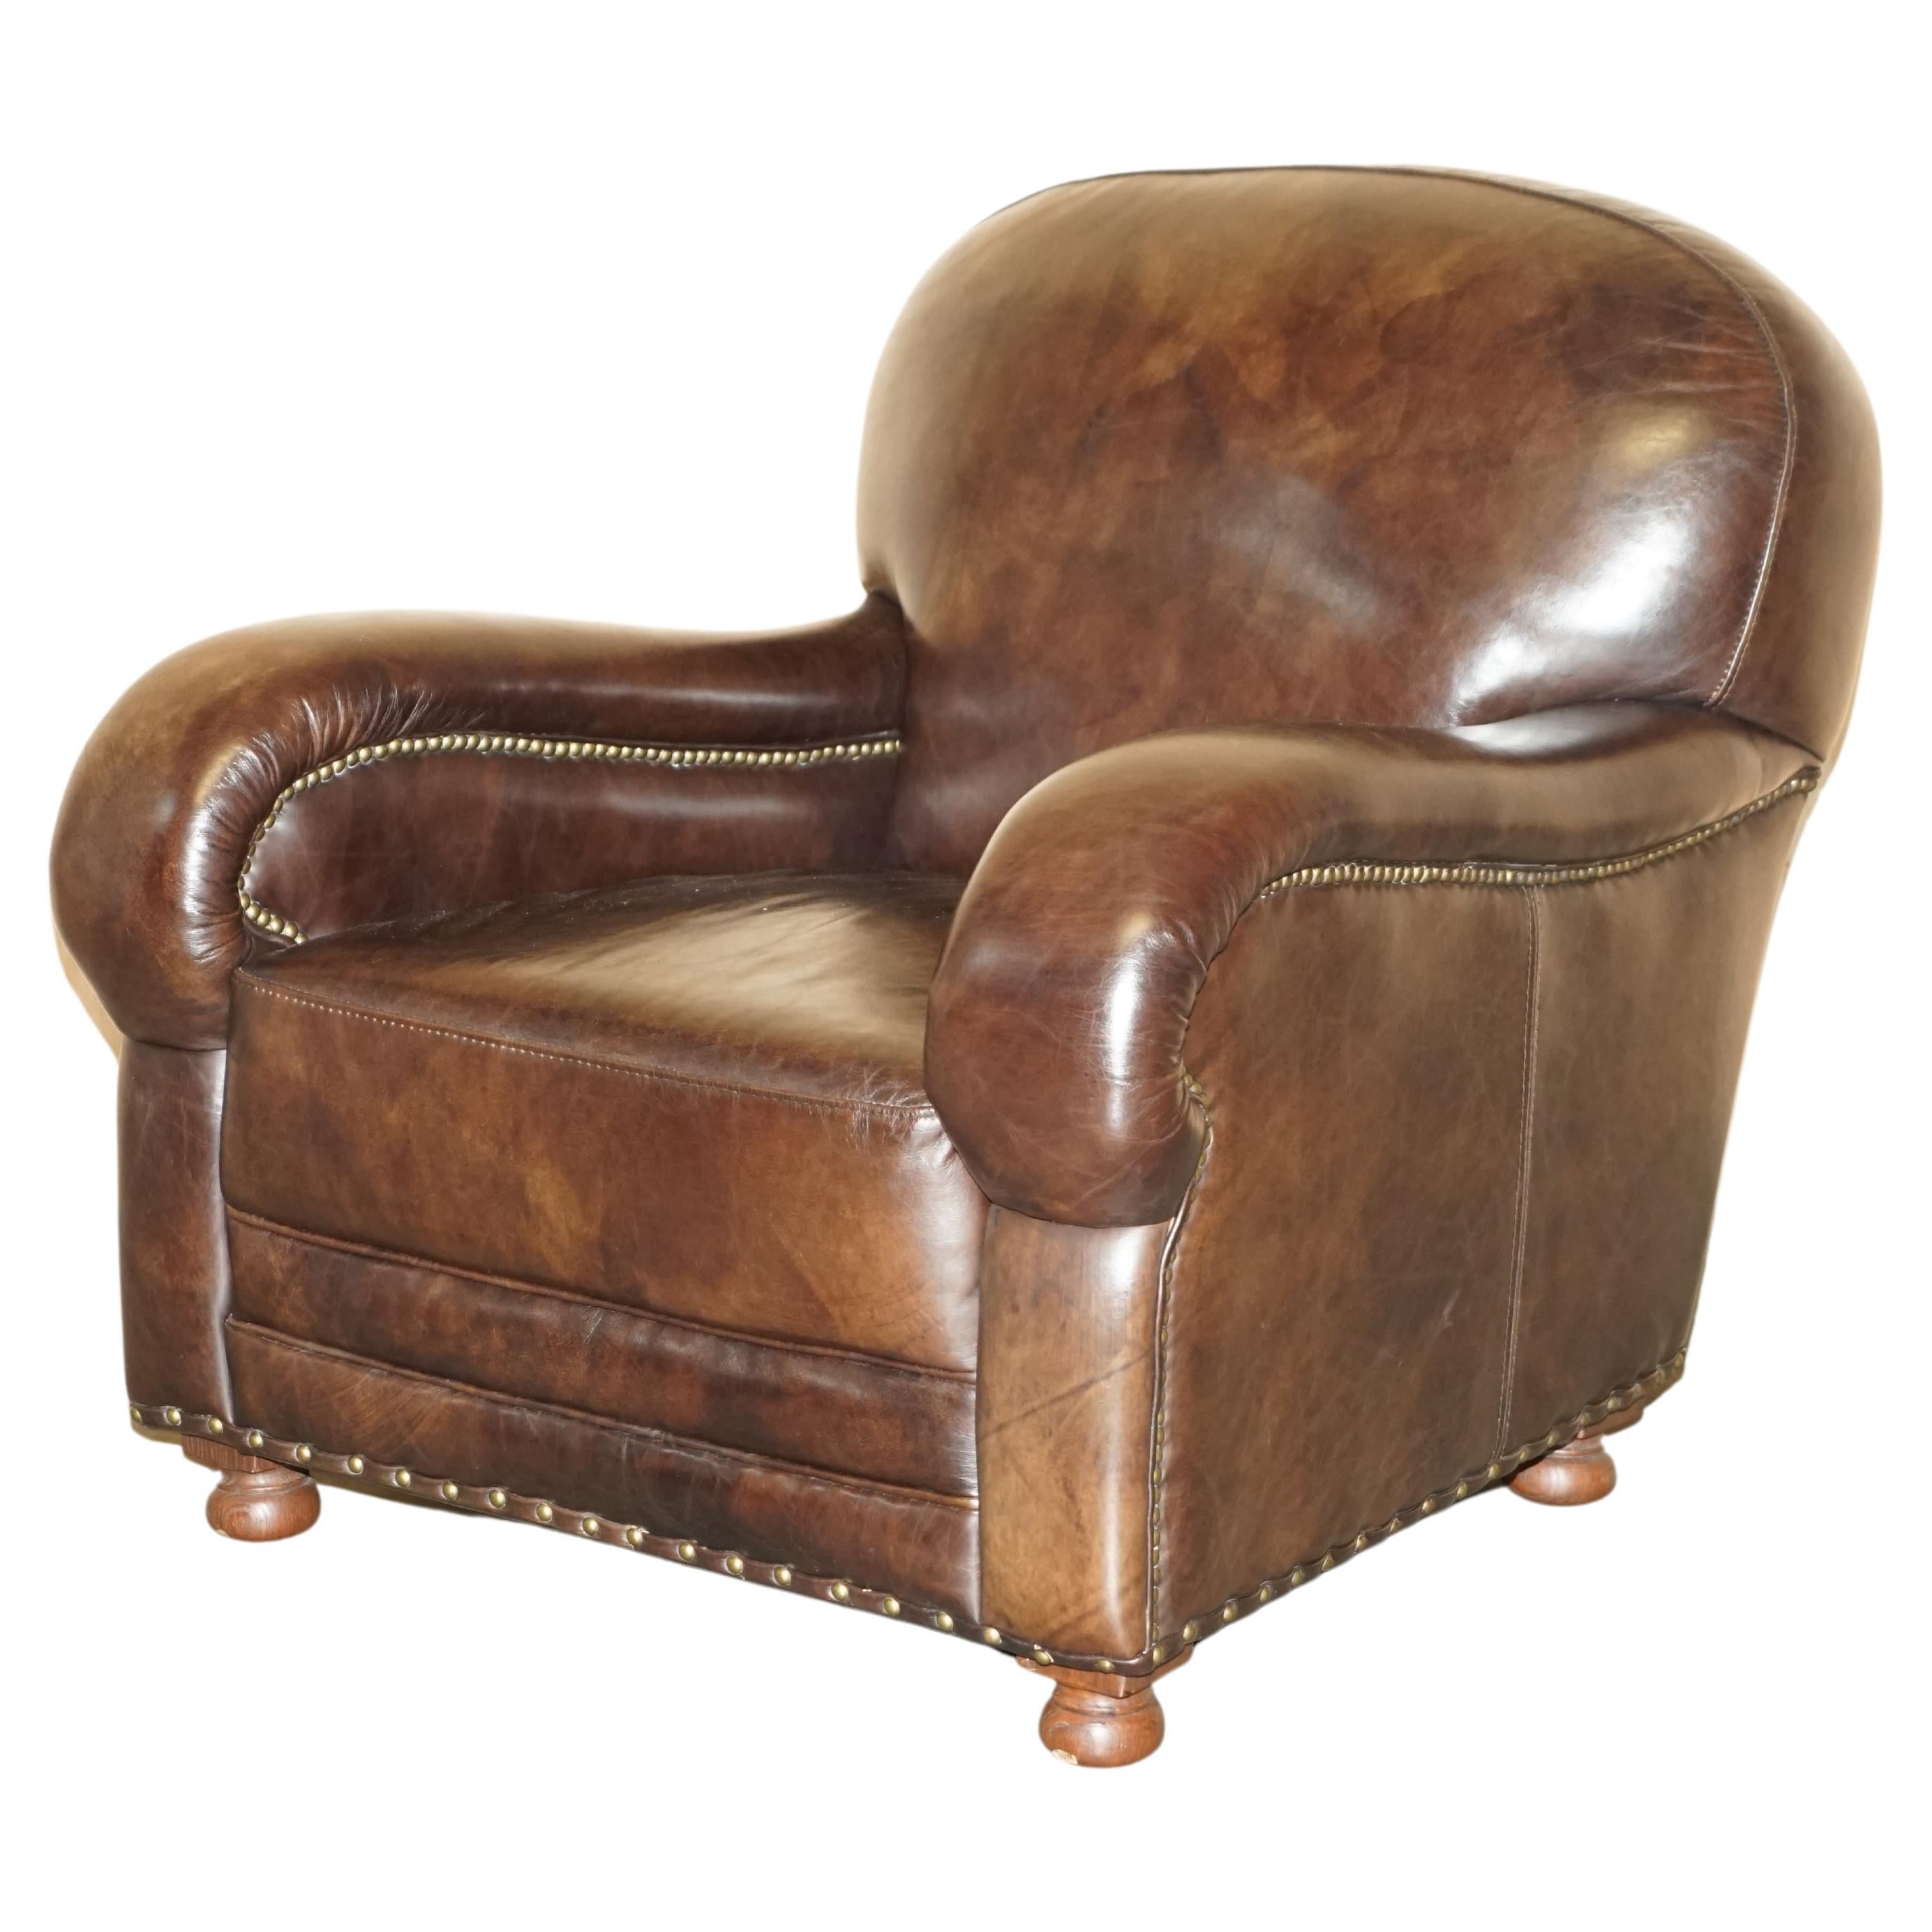 ViNTAGE COLLECTABLE DISCONTINUED AGED HERITAGE BROWN LEATHER CLUB ARMCHAIR For Sale